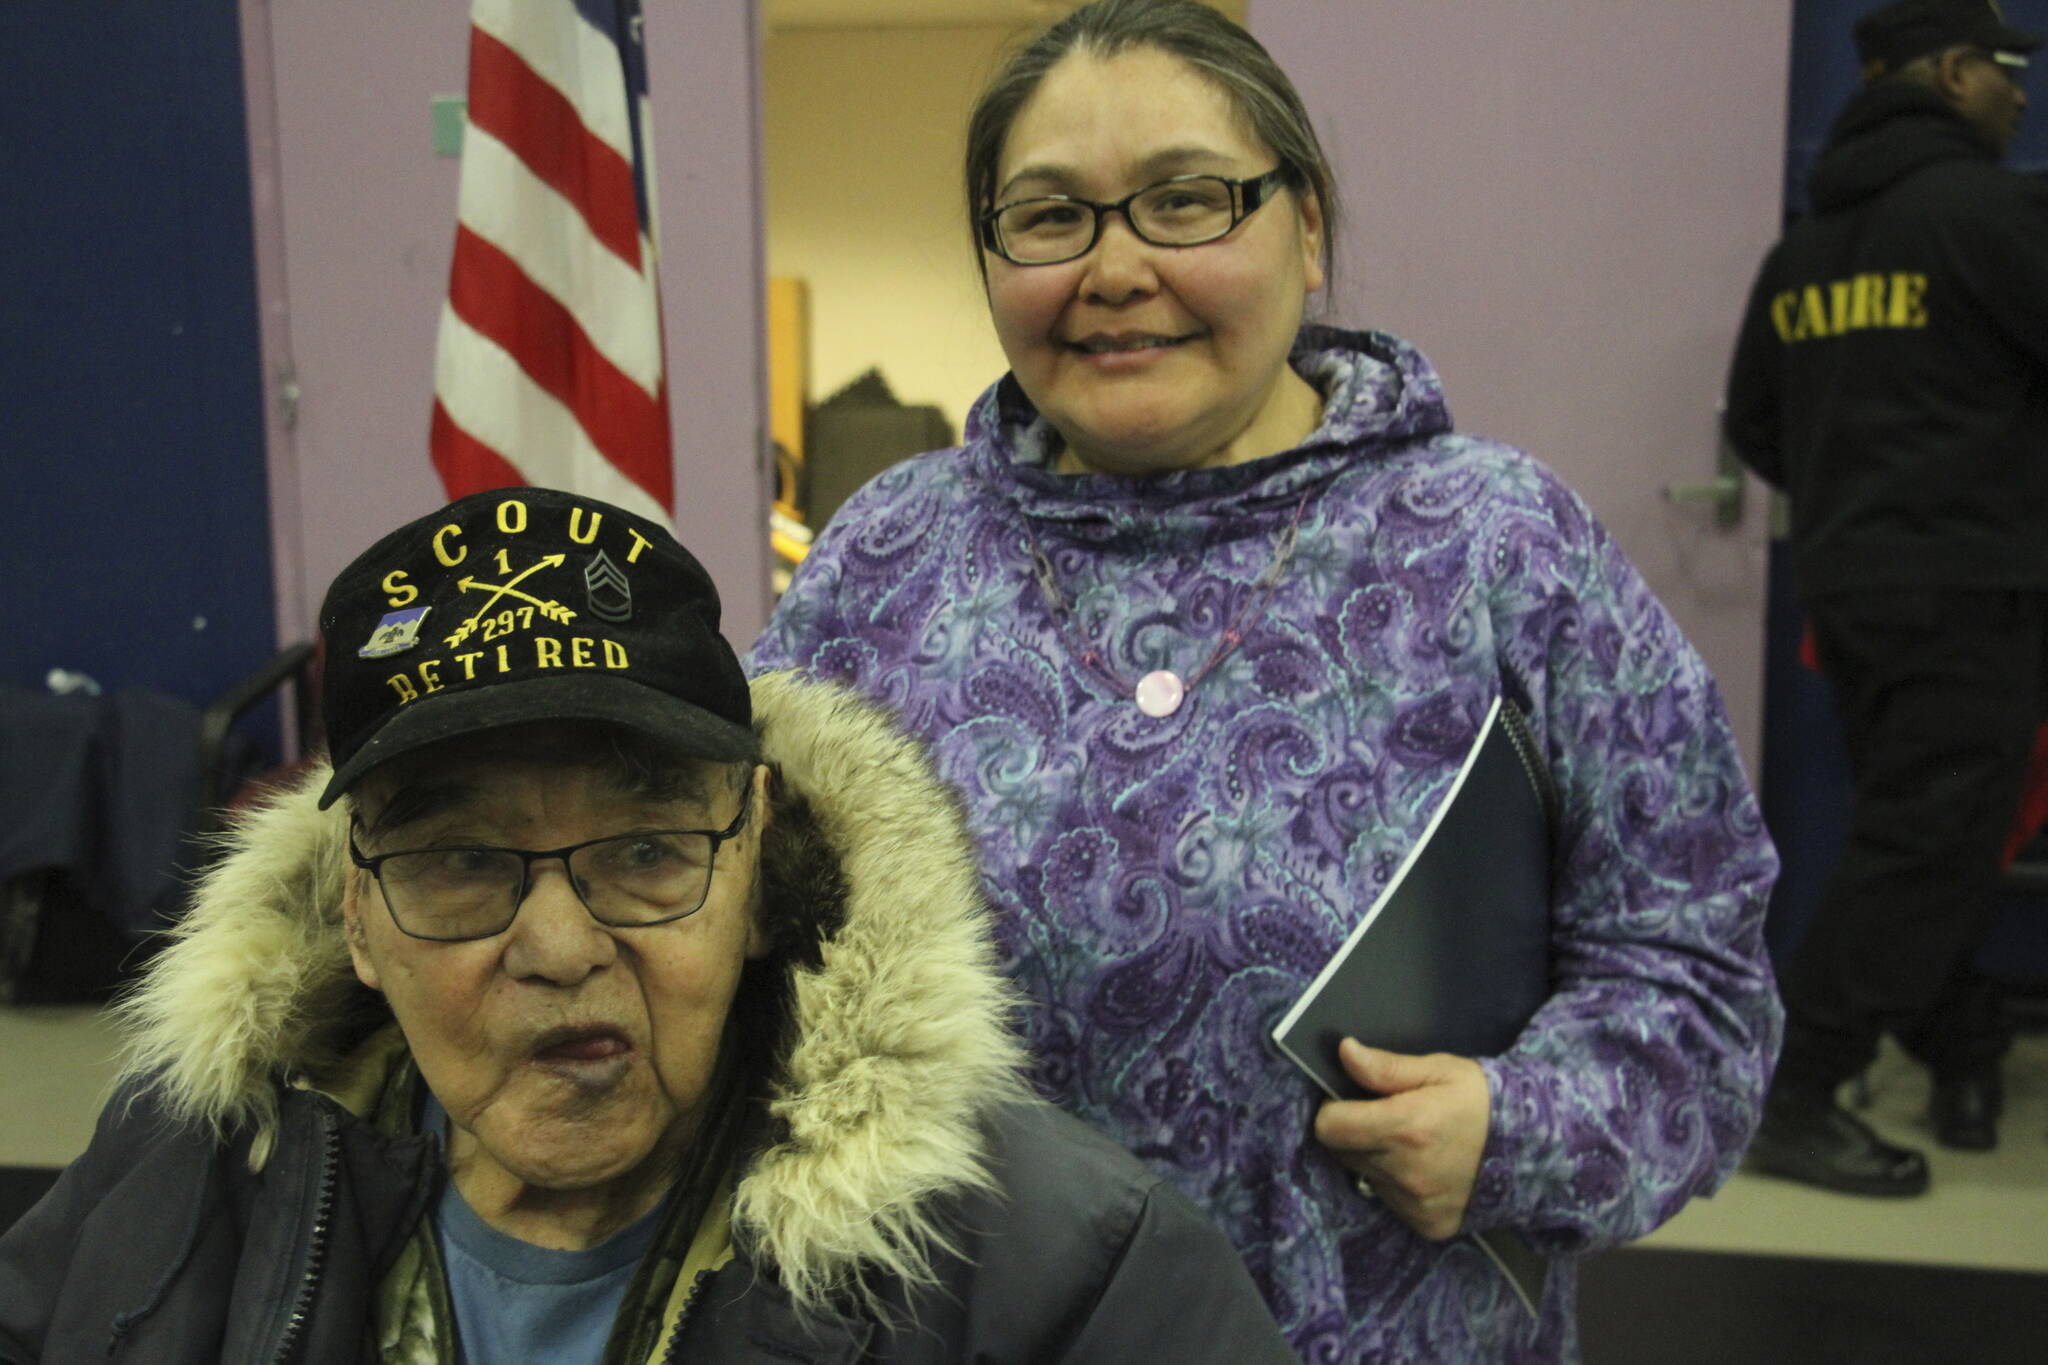 This March 28, 2023, photo shows Bruce Boolowon, left, posing with his eldest daughter, Rhona Pani Apassingok, at an Alaska National Guard ceremony in Gambell, Alaska. Maj. Gen. Torrence Saxe, the adjutant general of the Alaska National Guard, presented Alaska Heroism Medals to Boolowon, the last surviving guardsman of 16 who helped rescue 11 Navy crewmen after they crash landed on St. Lawrence Island on June 22, 1955, and to the family members of 15 other guardsman who are now deceased. (AP Photo / Mark Thiessen)